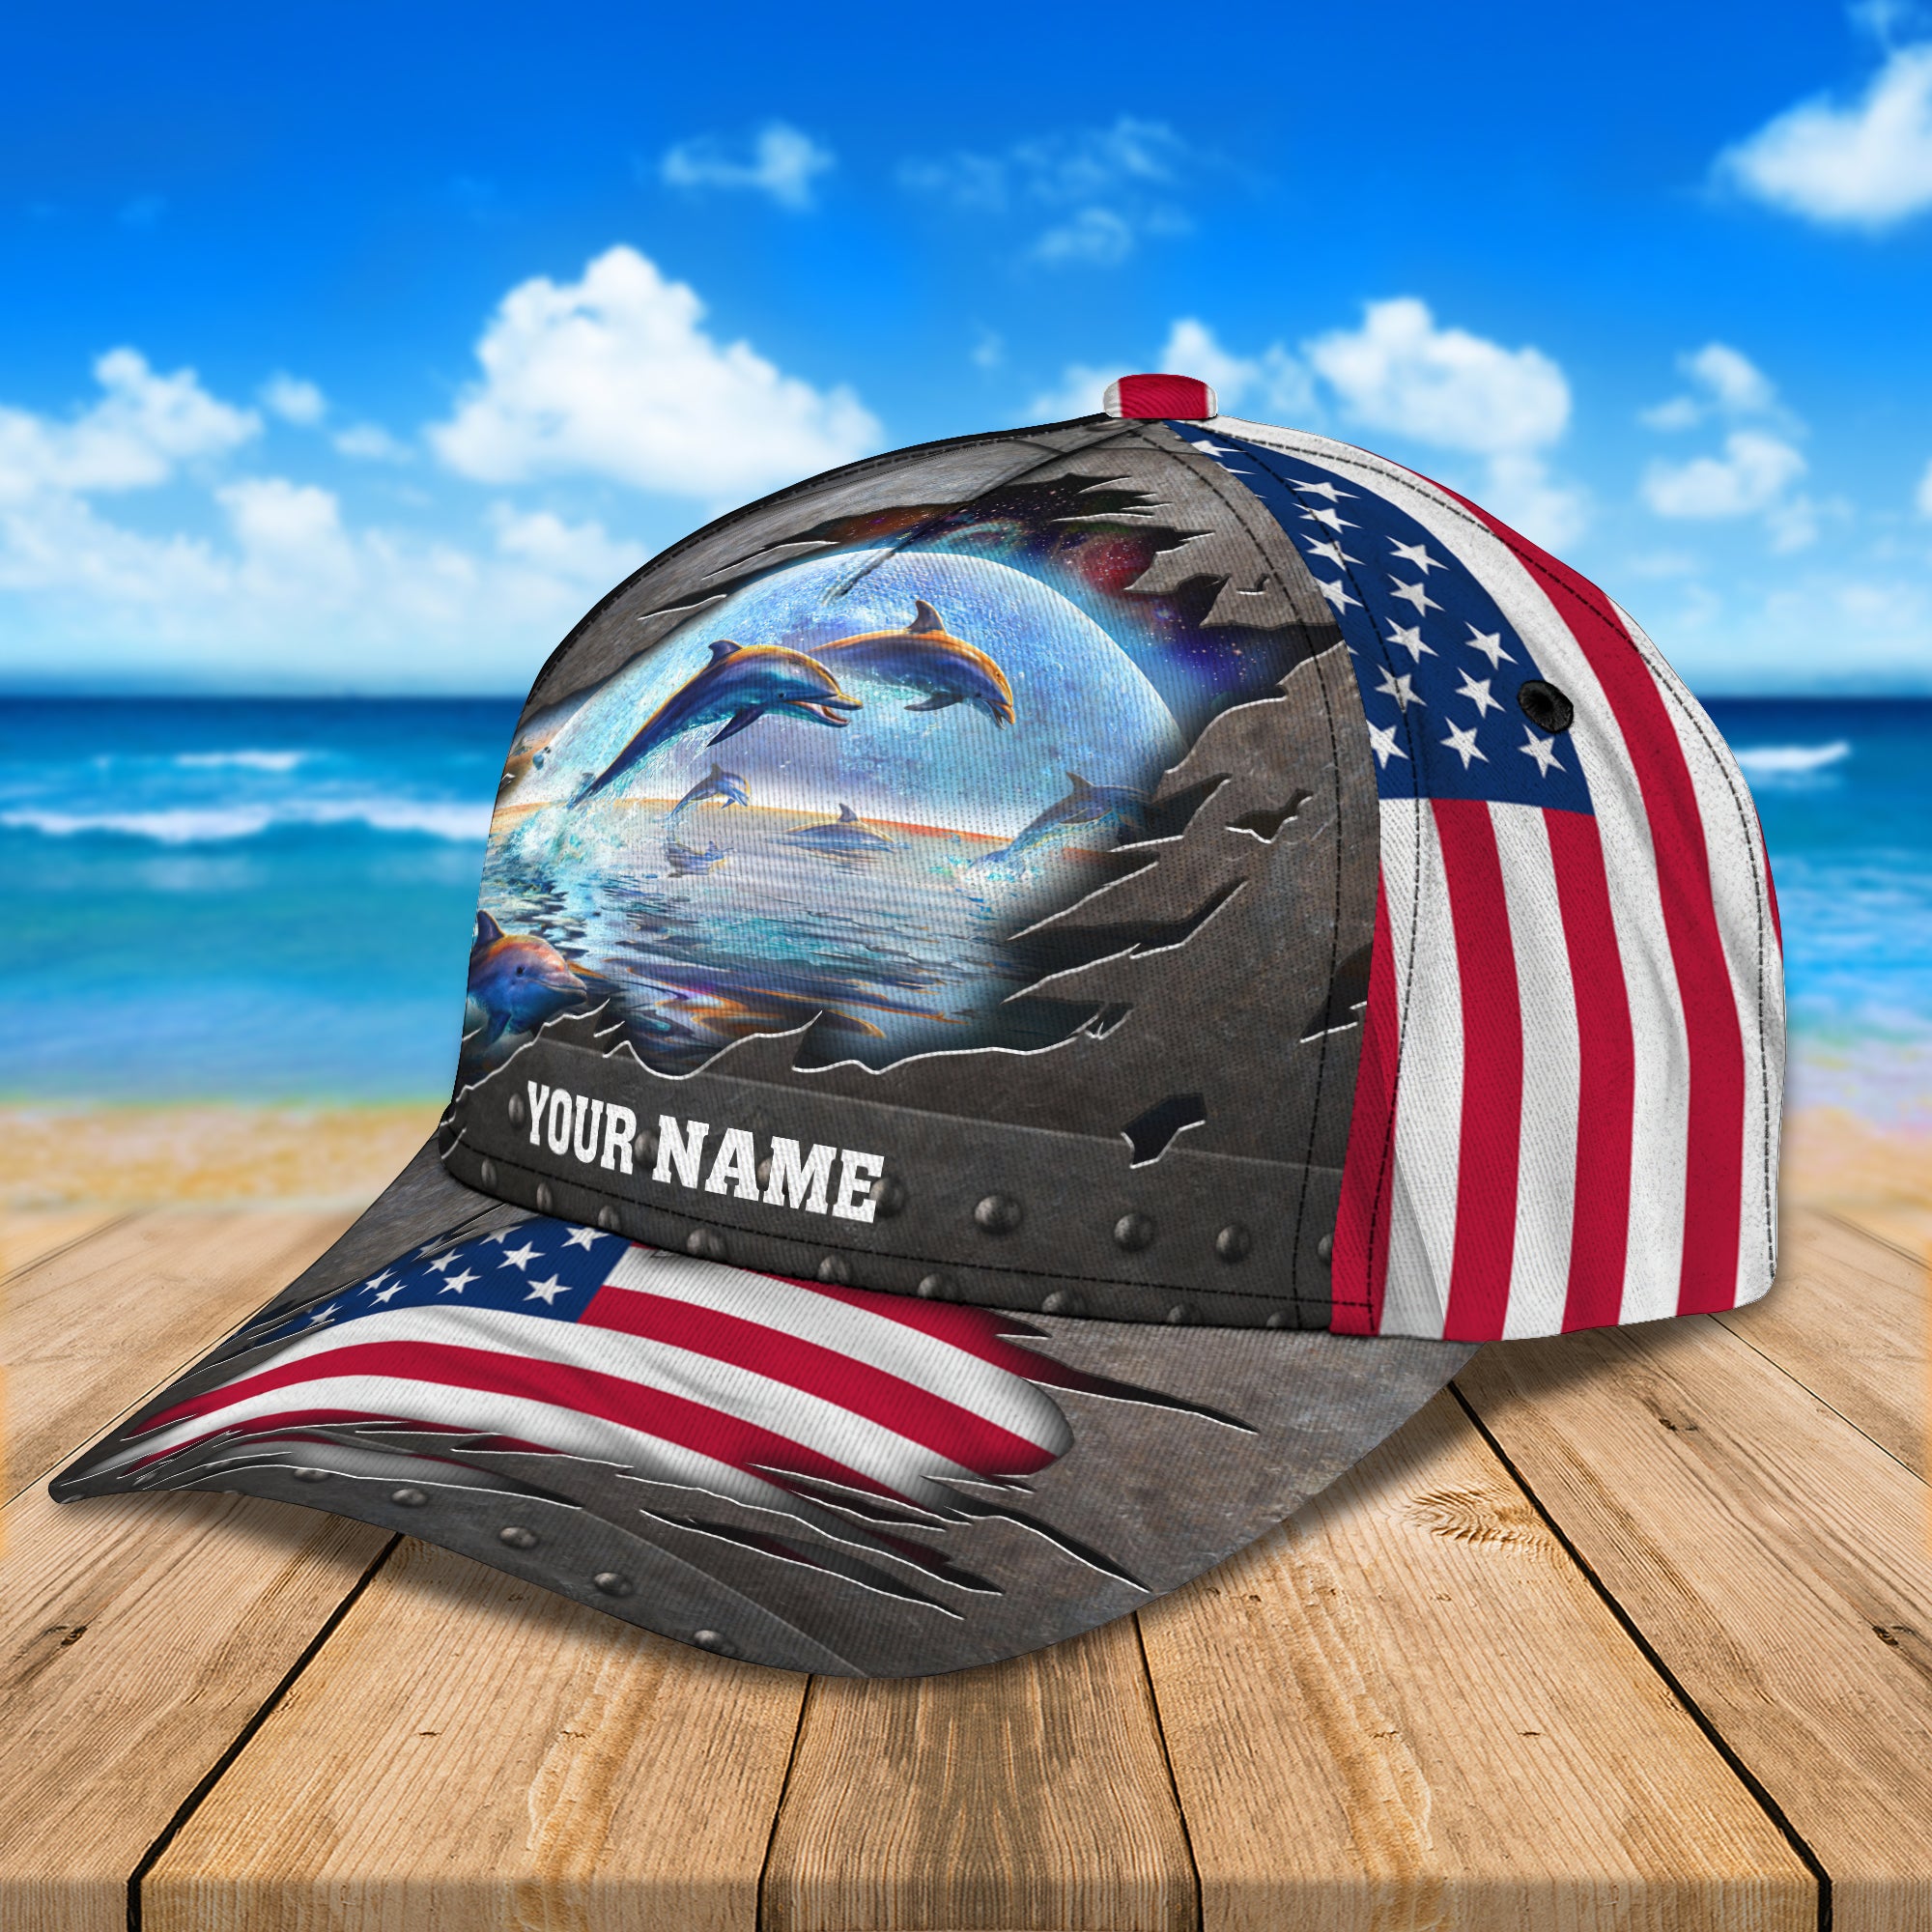 Dolphin - Personalized Name Cap - Urt96